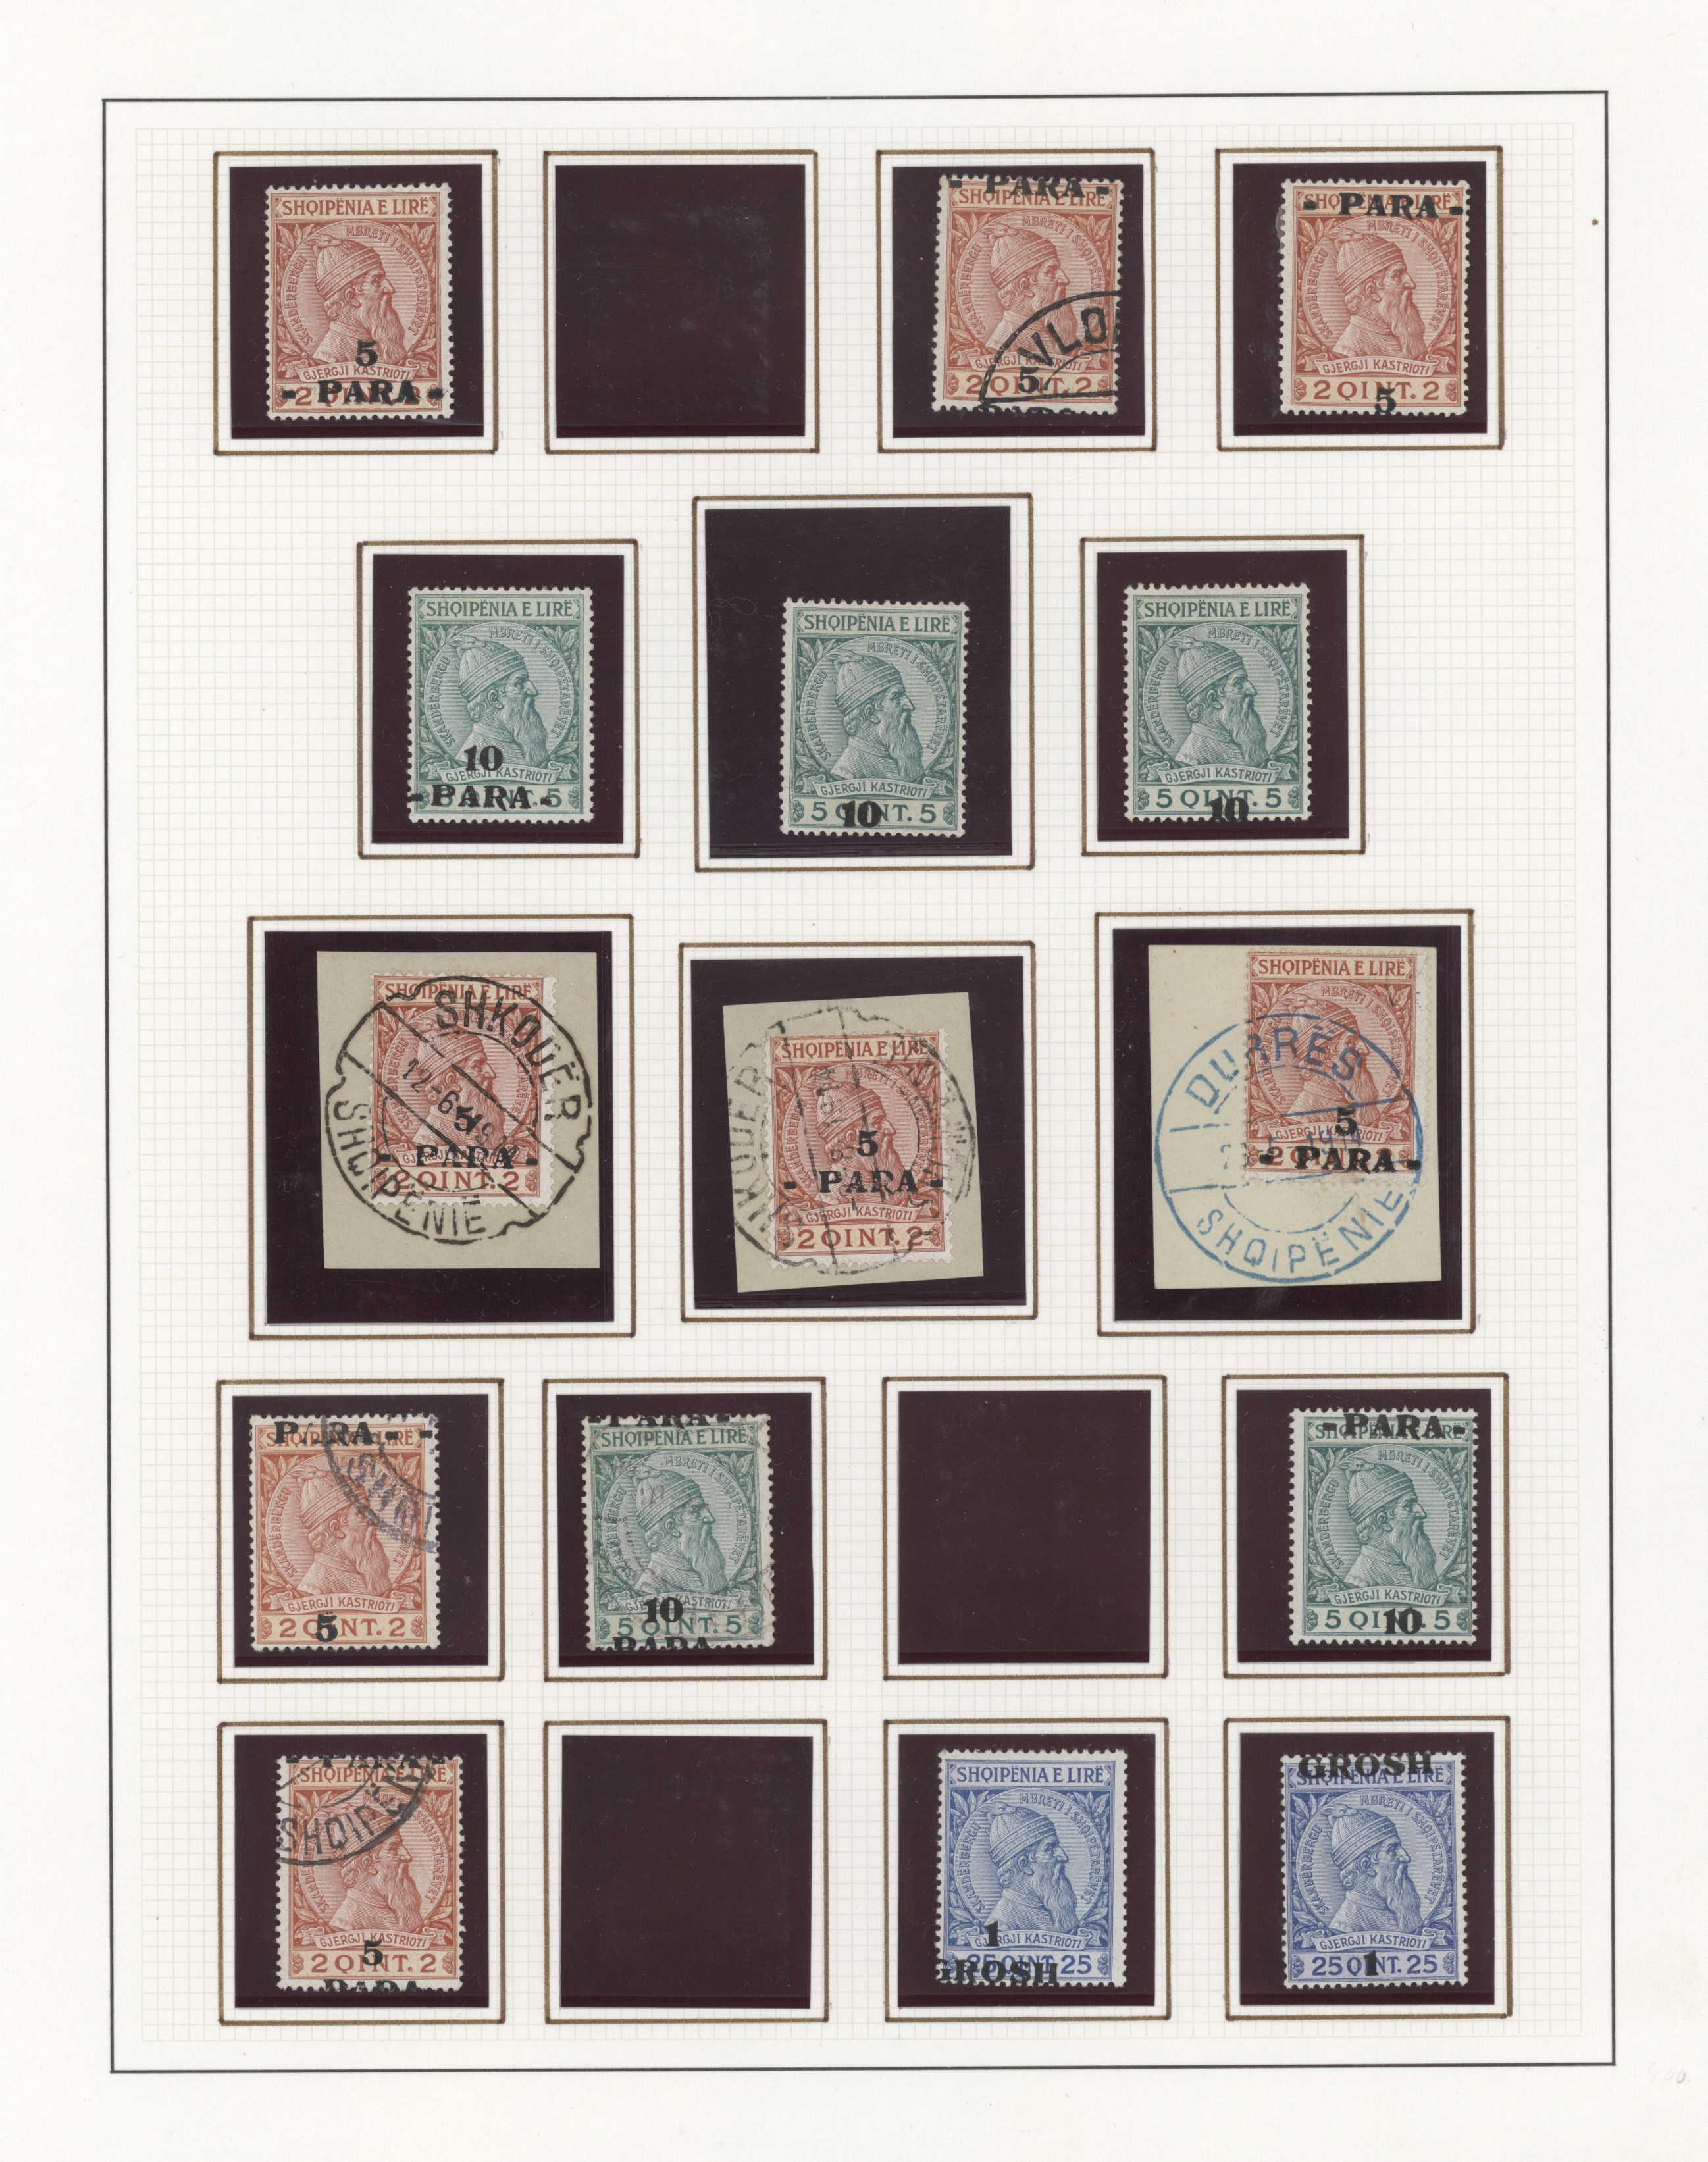 Lot 34896 - albanien  -  Auktionshaus Christoph Gärtner GmbH & Co. KG Sale #44 Collections Germany